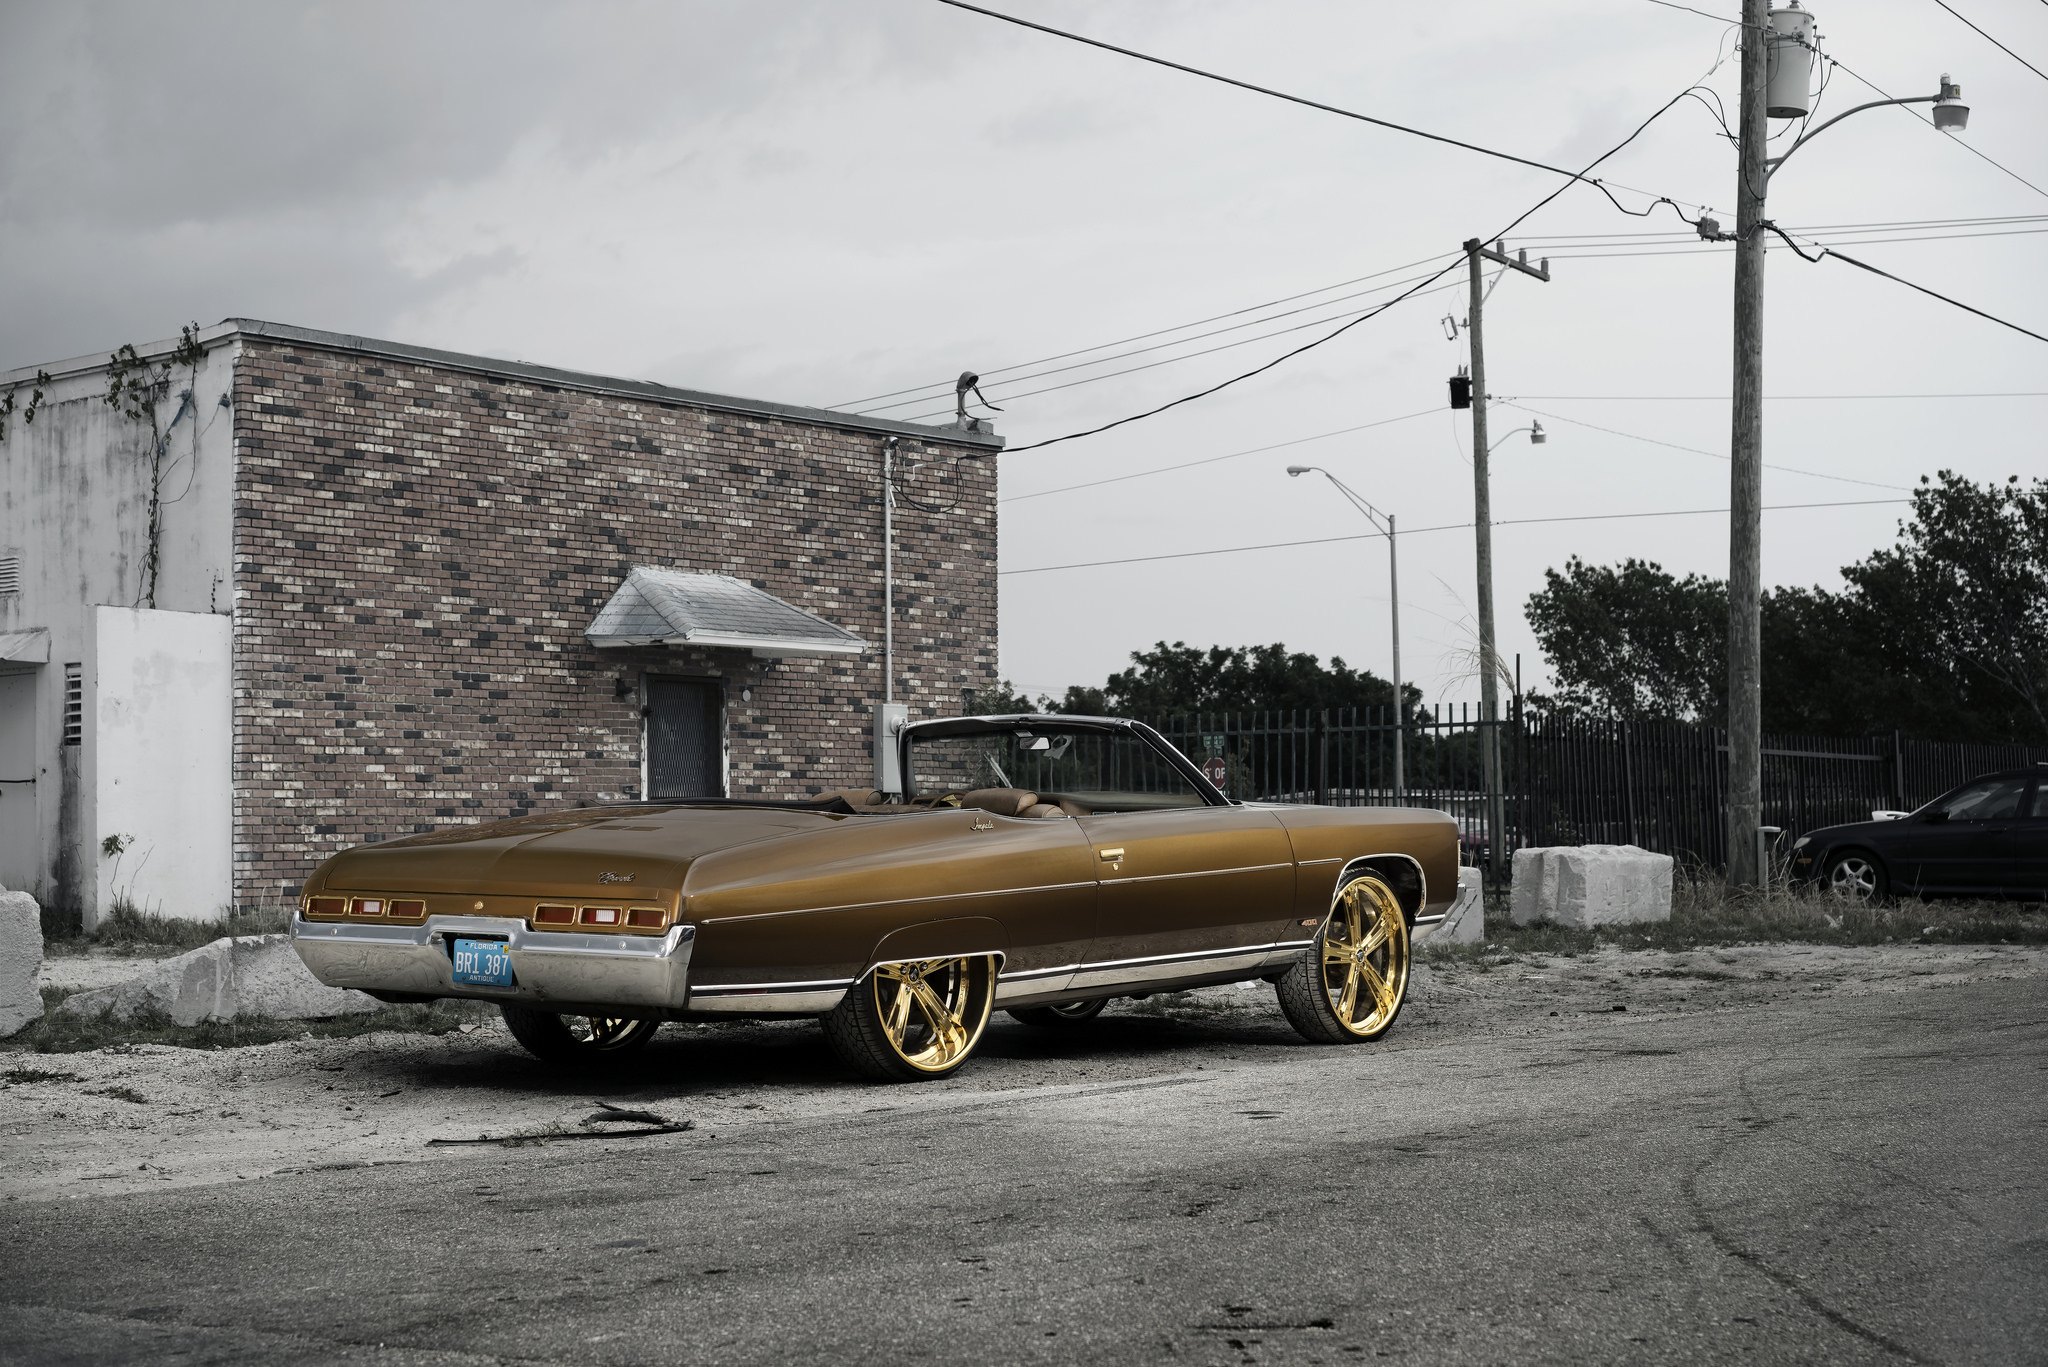 Chrome Rear Bumper Cover on Lifted Chevy Impala - Photo by Jordan Donnelly